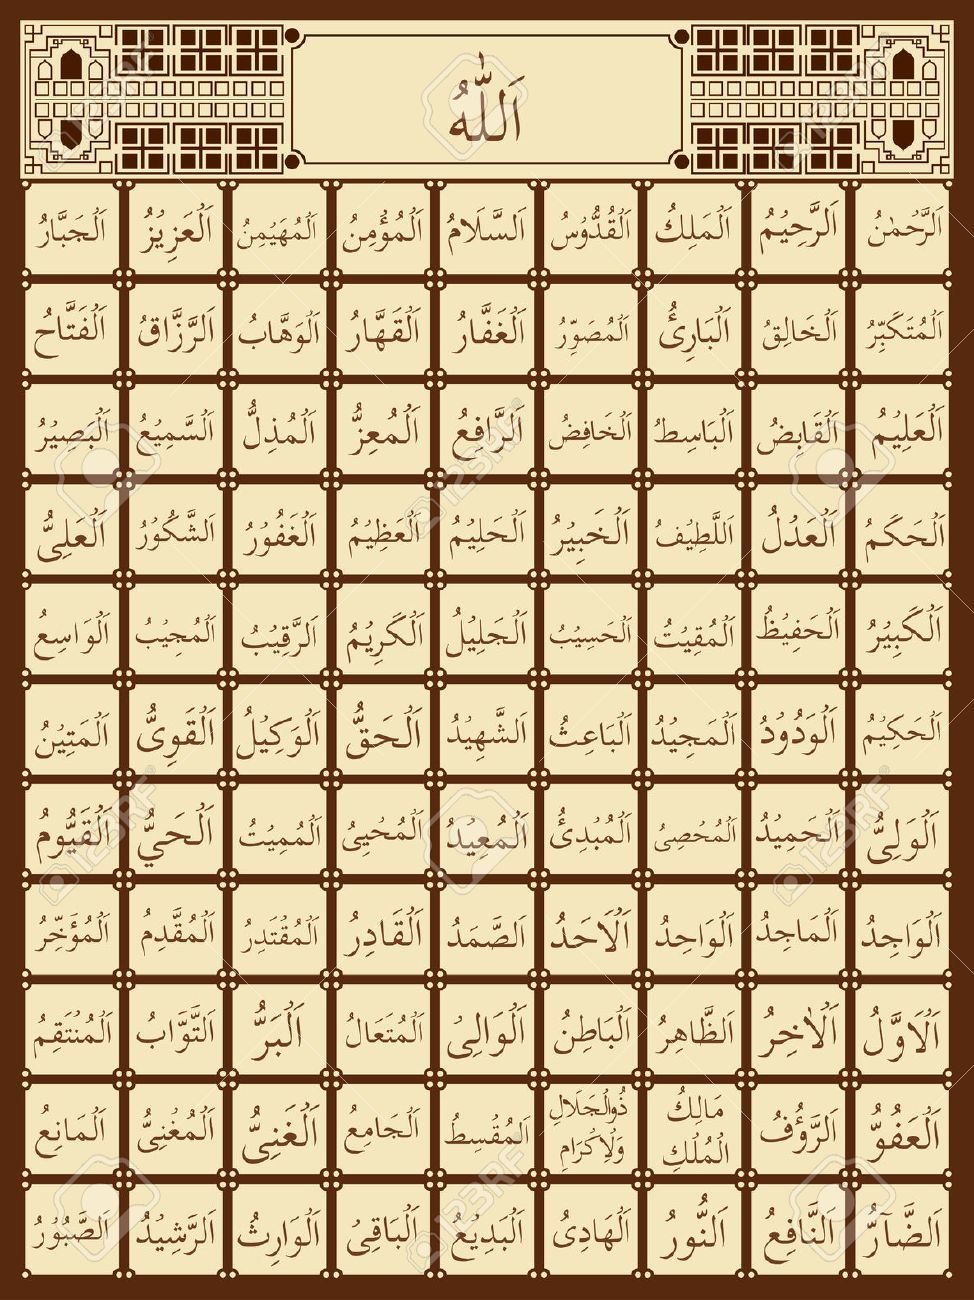 99names of allah projects for kids